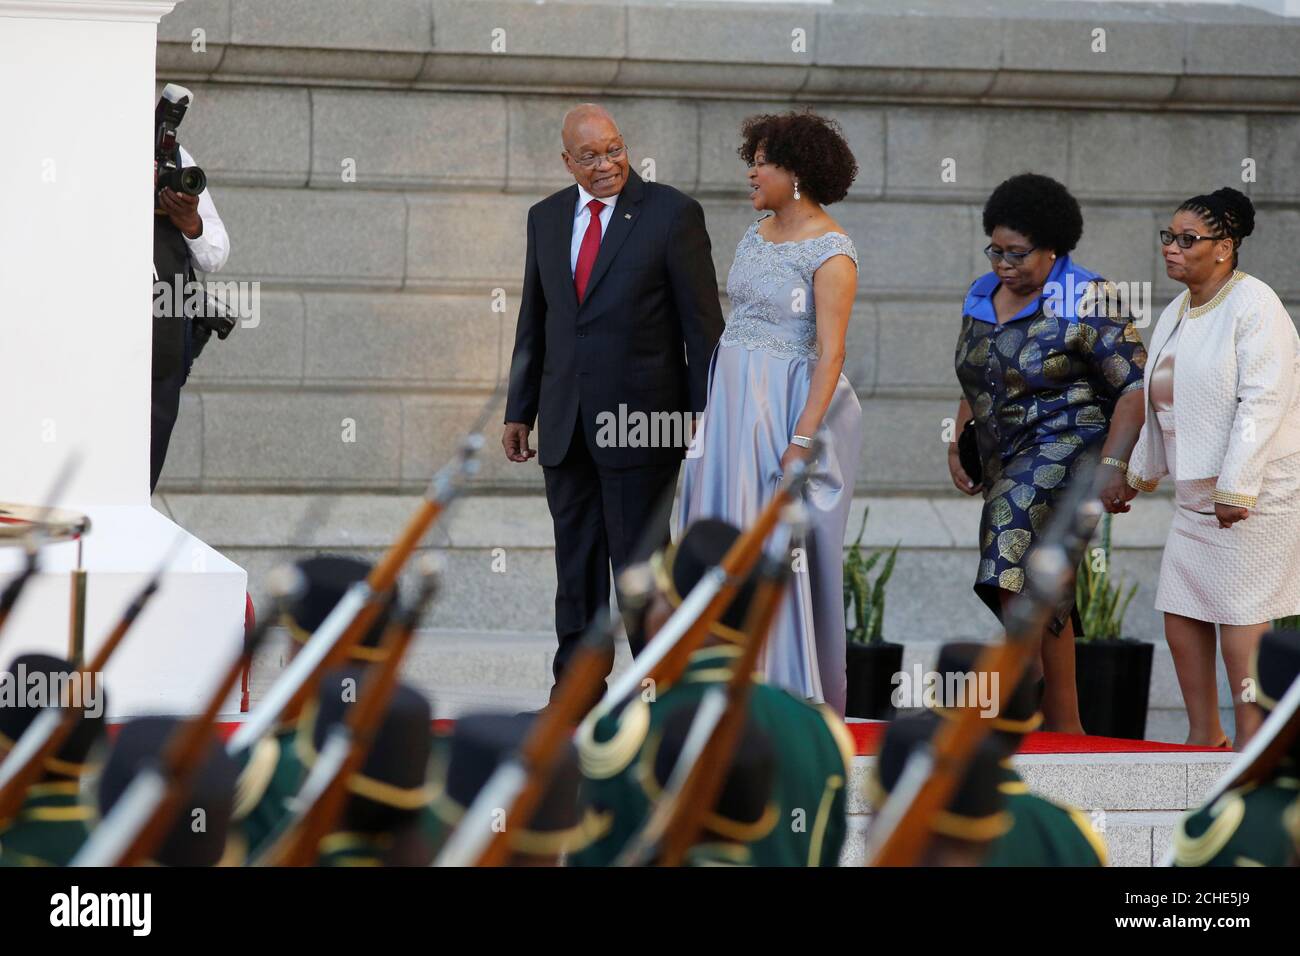 South Africa's President Jacob Zuma reviews the honor guard ahead of his  State of the Nation Address (SONA) to a joint sitting of the National  Assembly and the National Council of Provinces